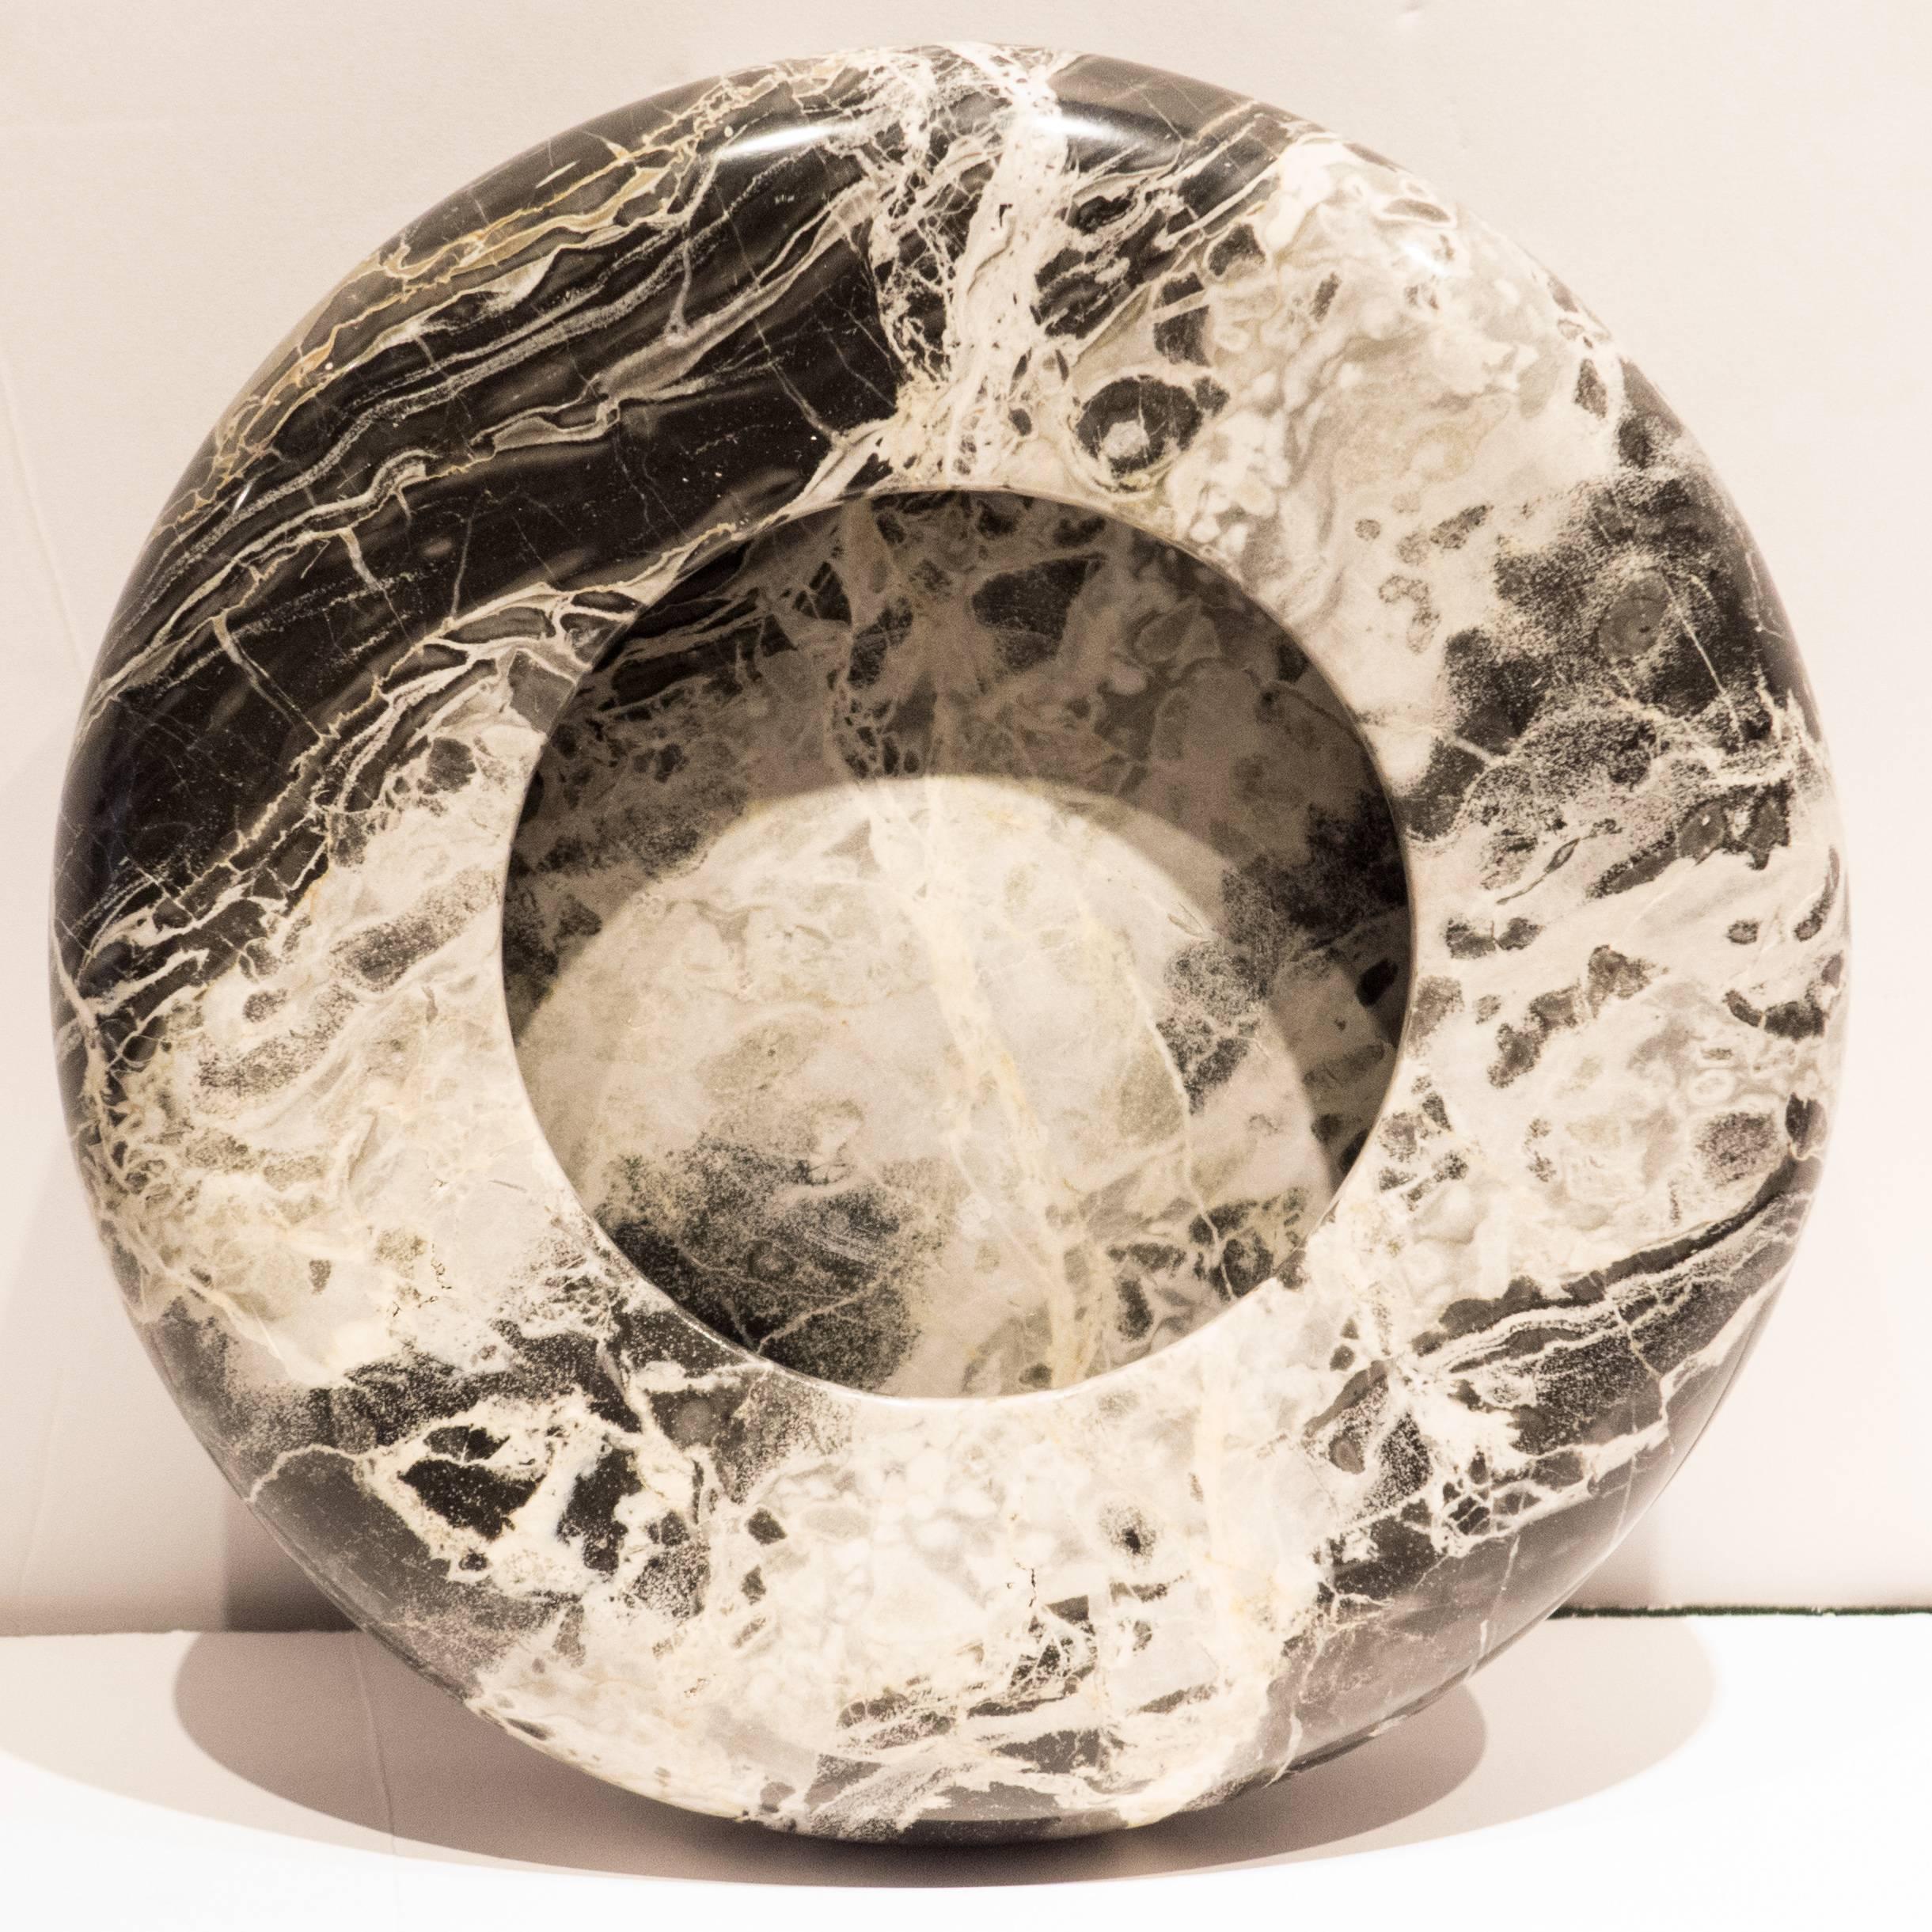 Minimalist Up & Up Marble Centerpiece Bowl for Atelier International